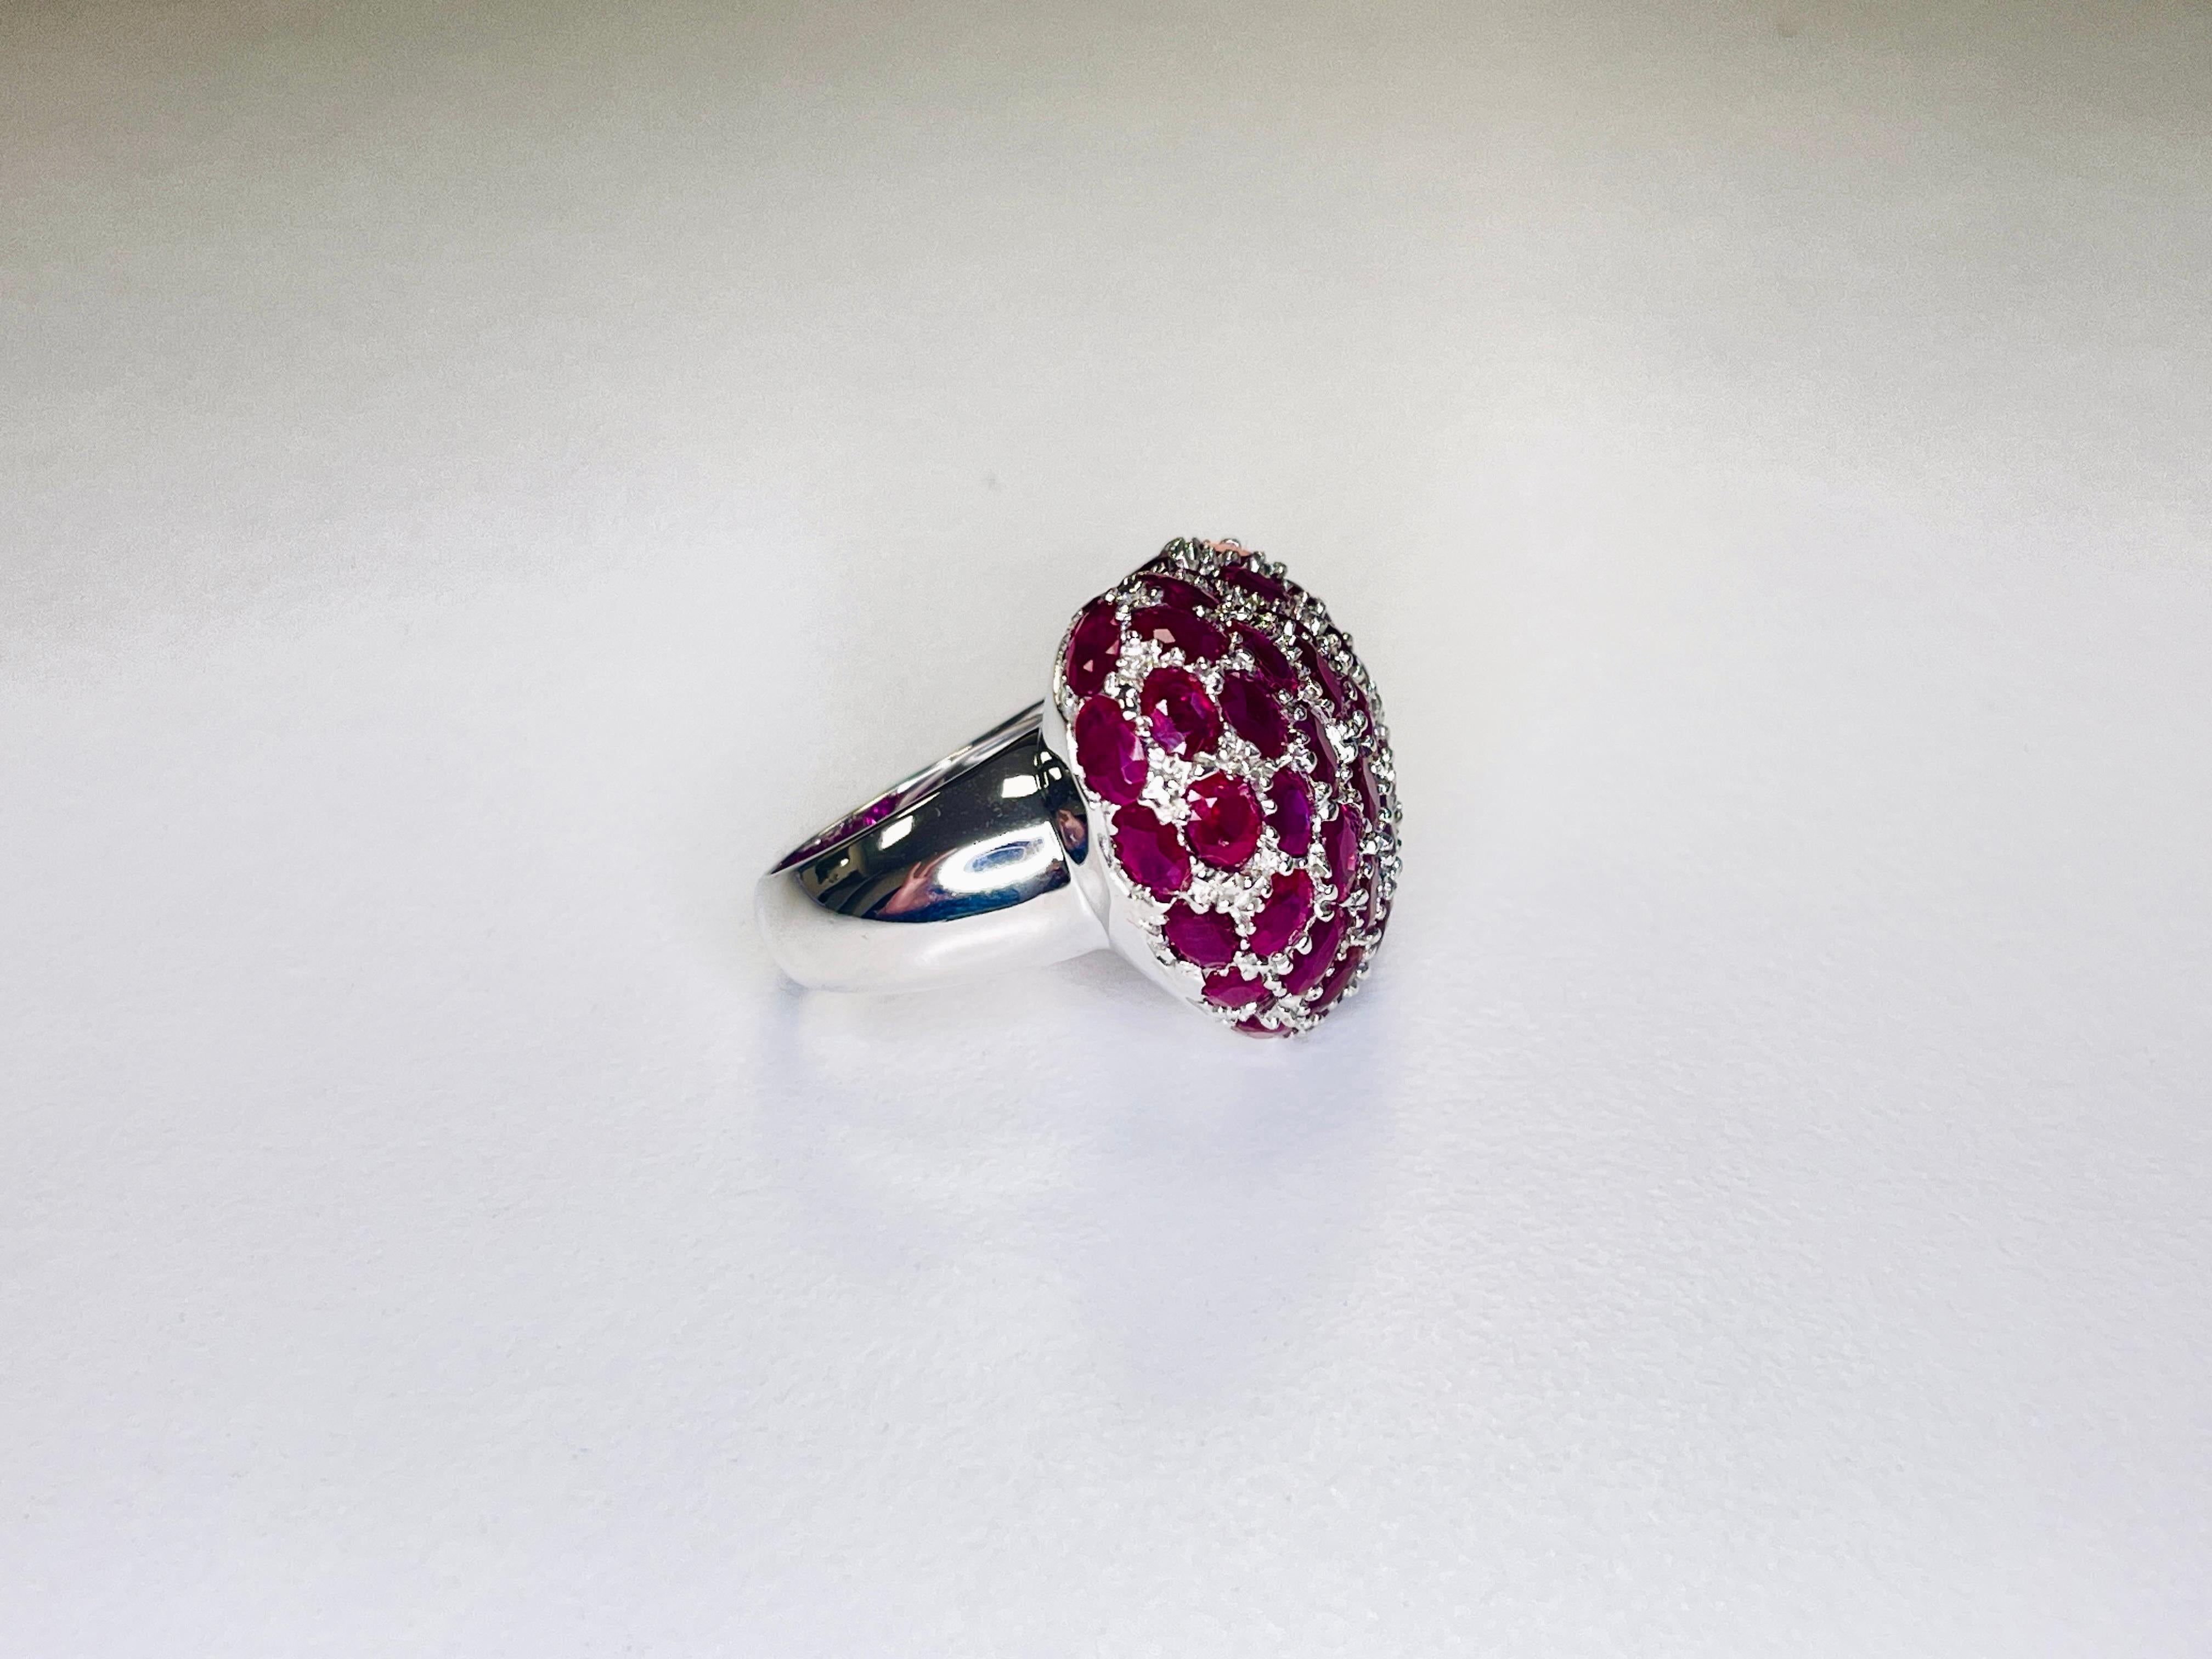 16.50cts White Gold Heart Ruby Oval Shape High Polished Rhodium Ring 18K  1